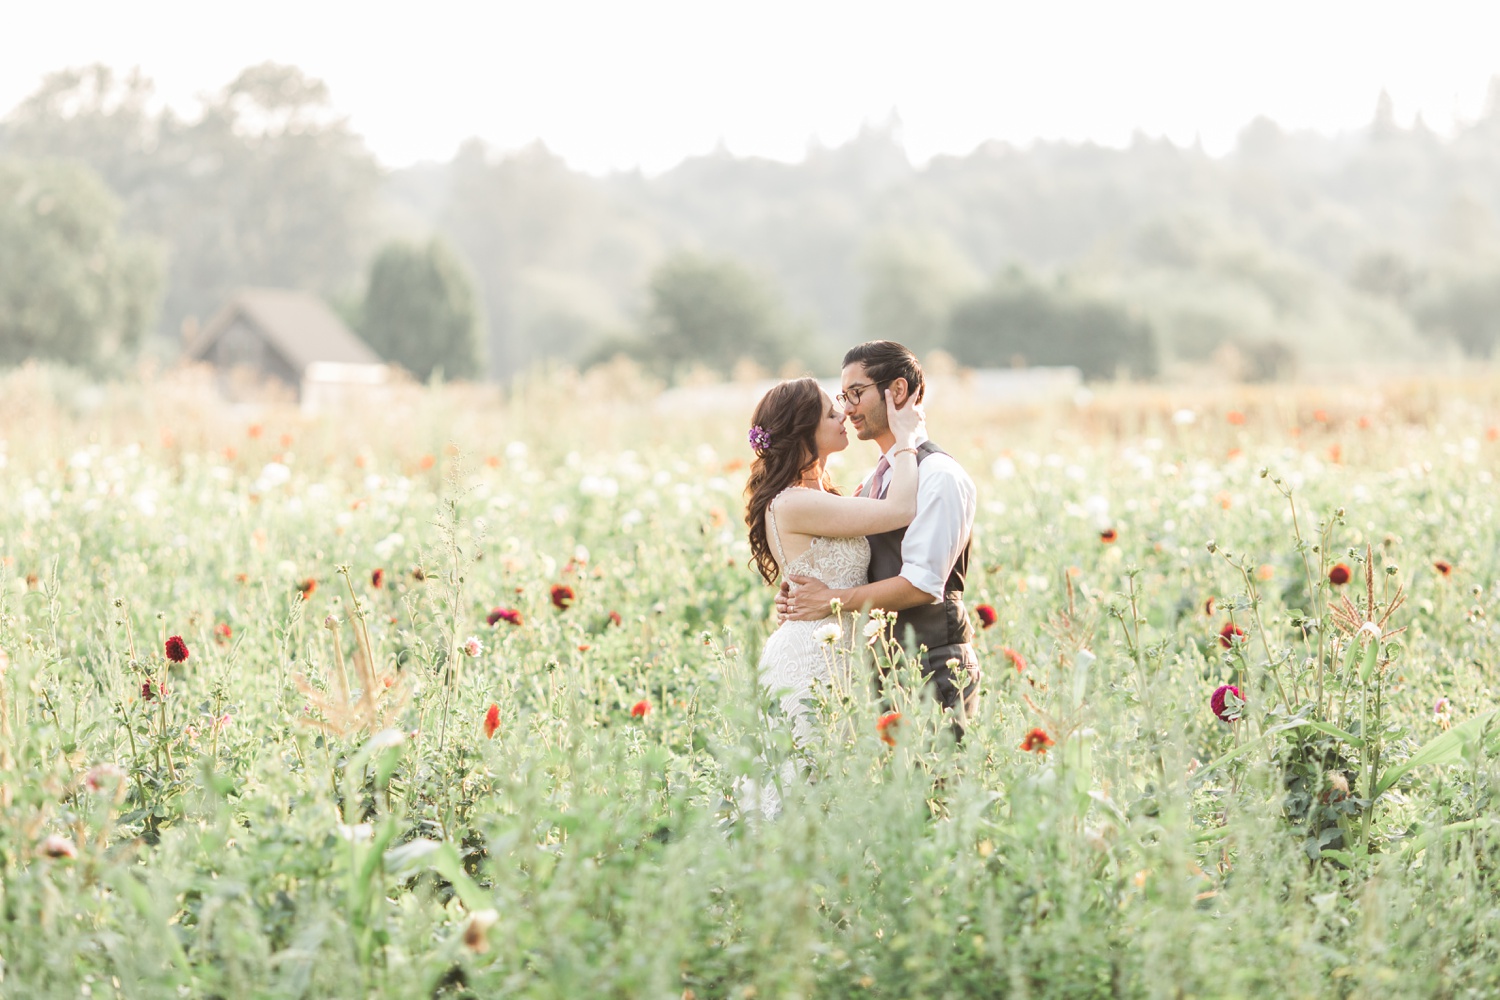 A bride and groom kiss in a field of flowers before their wedding at Woodland Meadow Farms in Snohomish, a wedding venue near Seattle, WA. | Joanna Monger Photography | Seattle & Snohomish Photographer